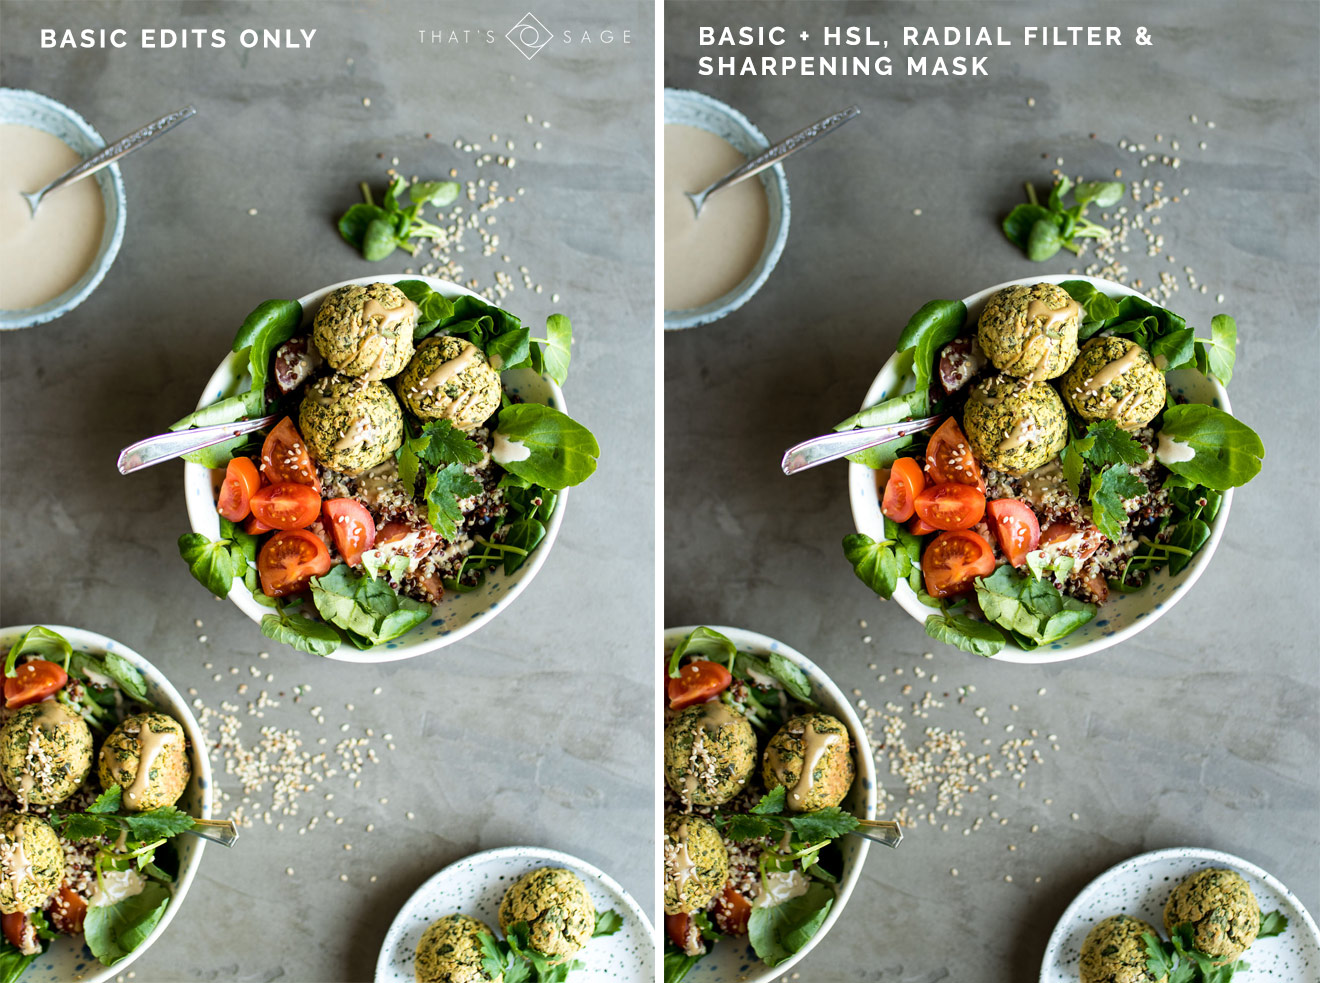 3 Adobe Lightroom Hacks that will Revolutionise your Food Photography Editing